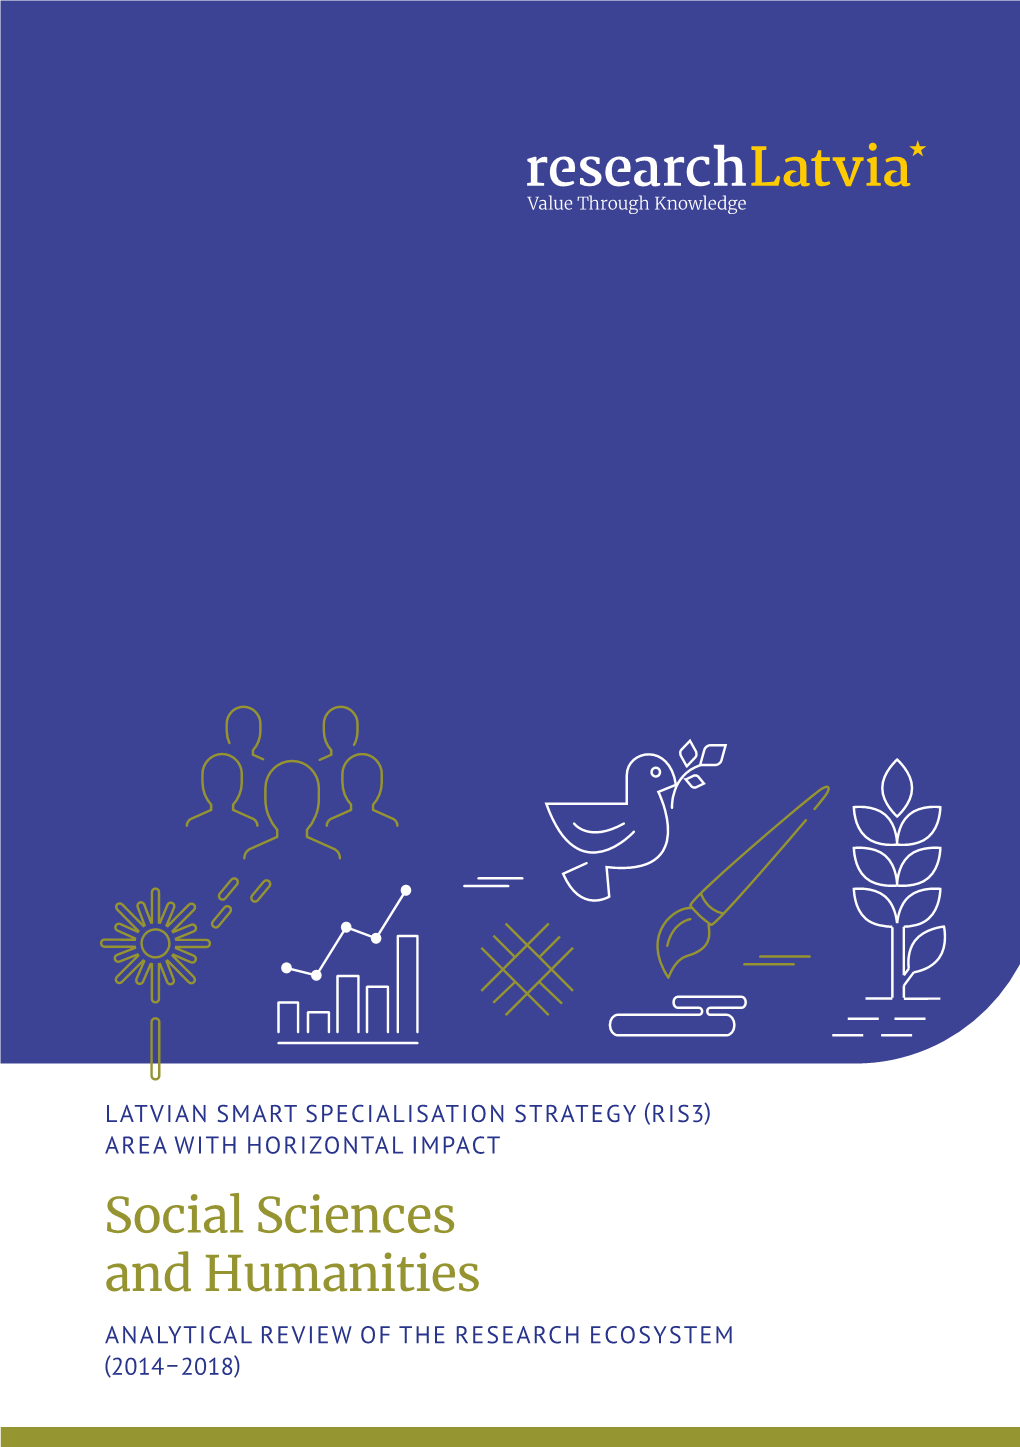 Analytic Report of Research Ecosystem of Social Sciences and Humanities